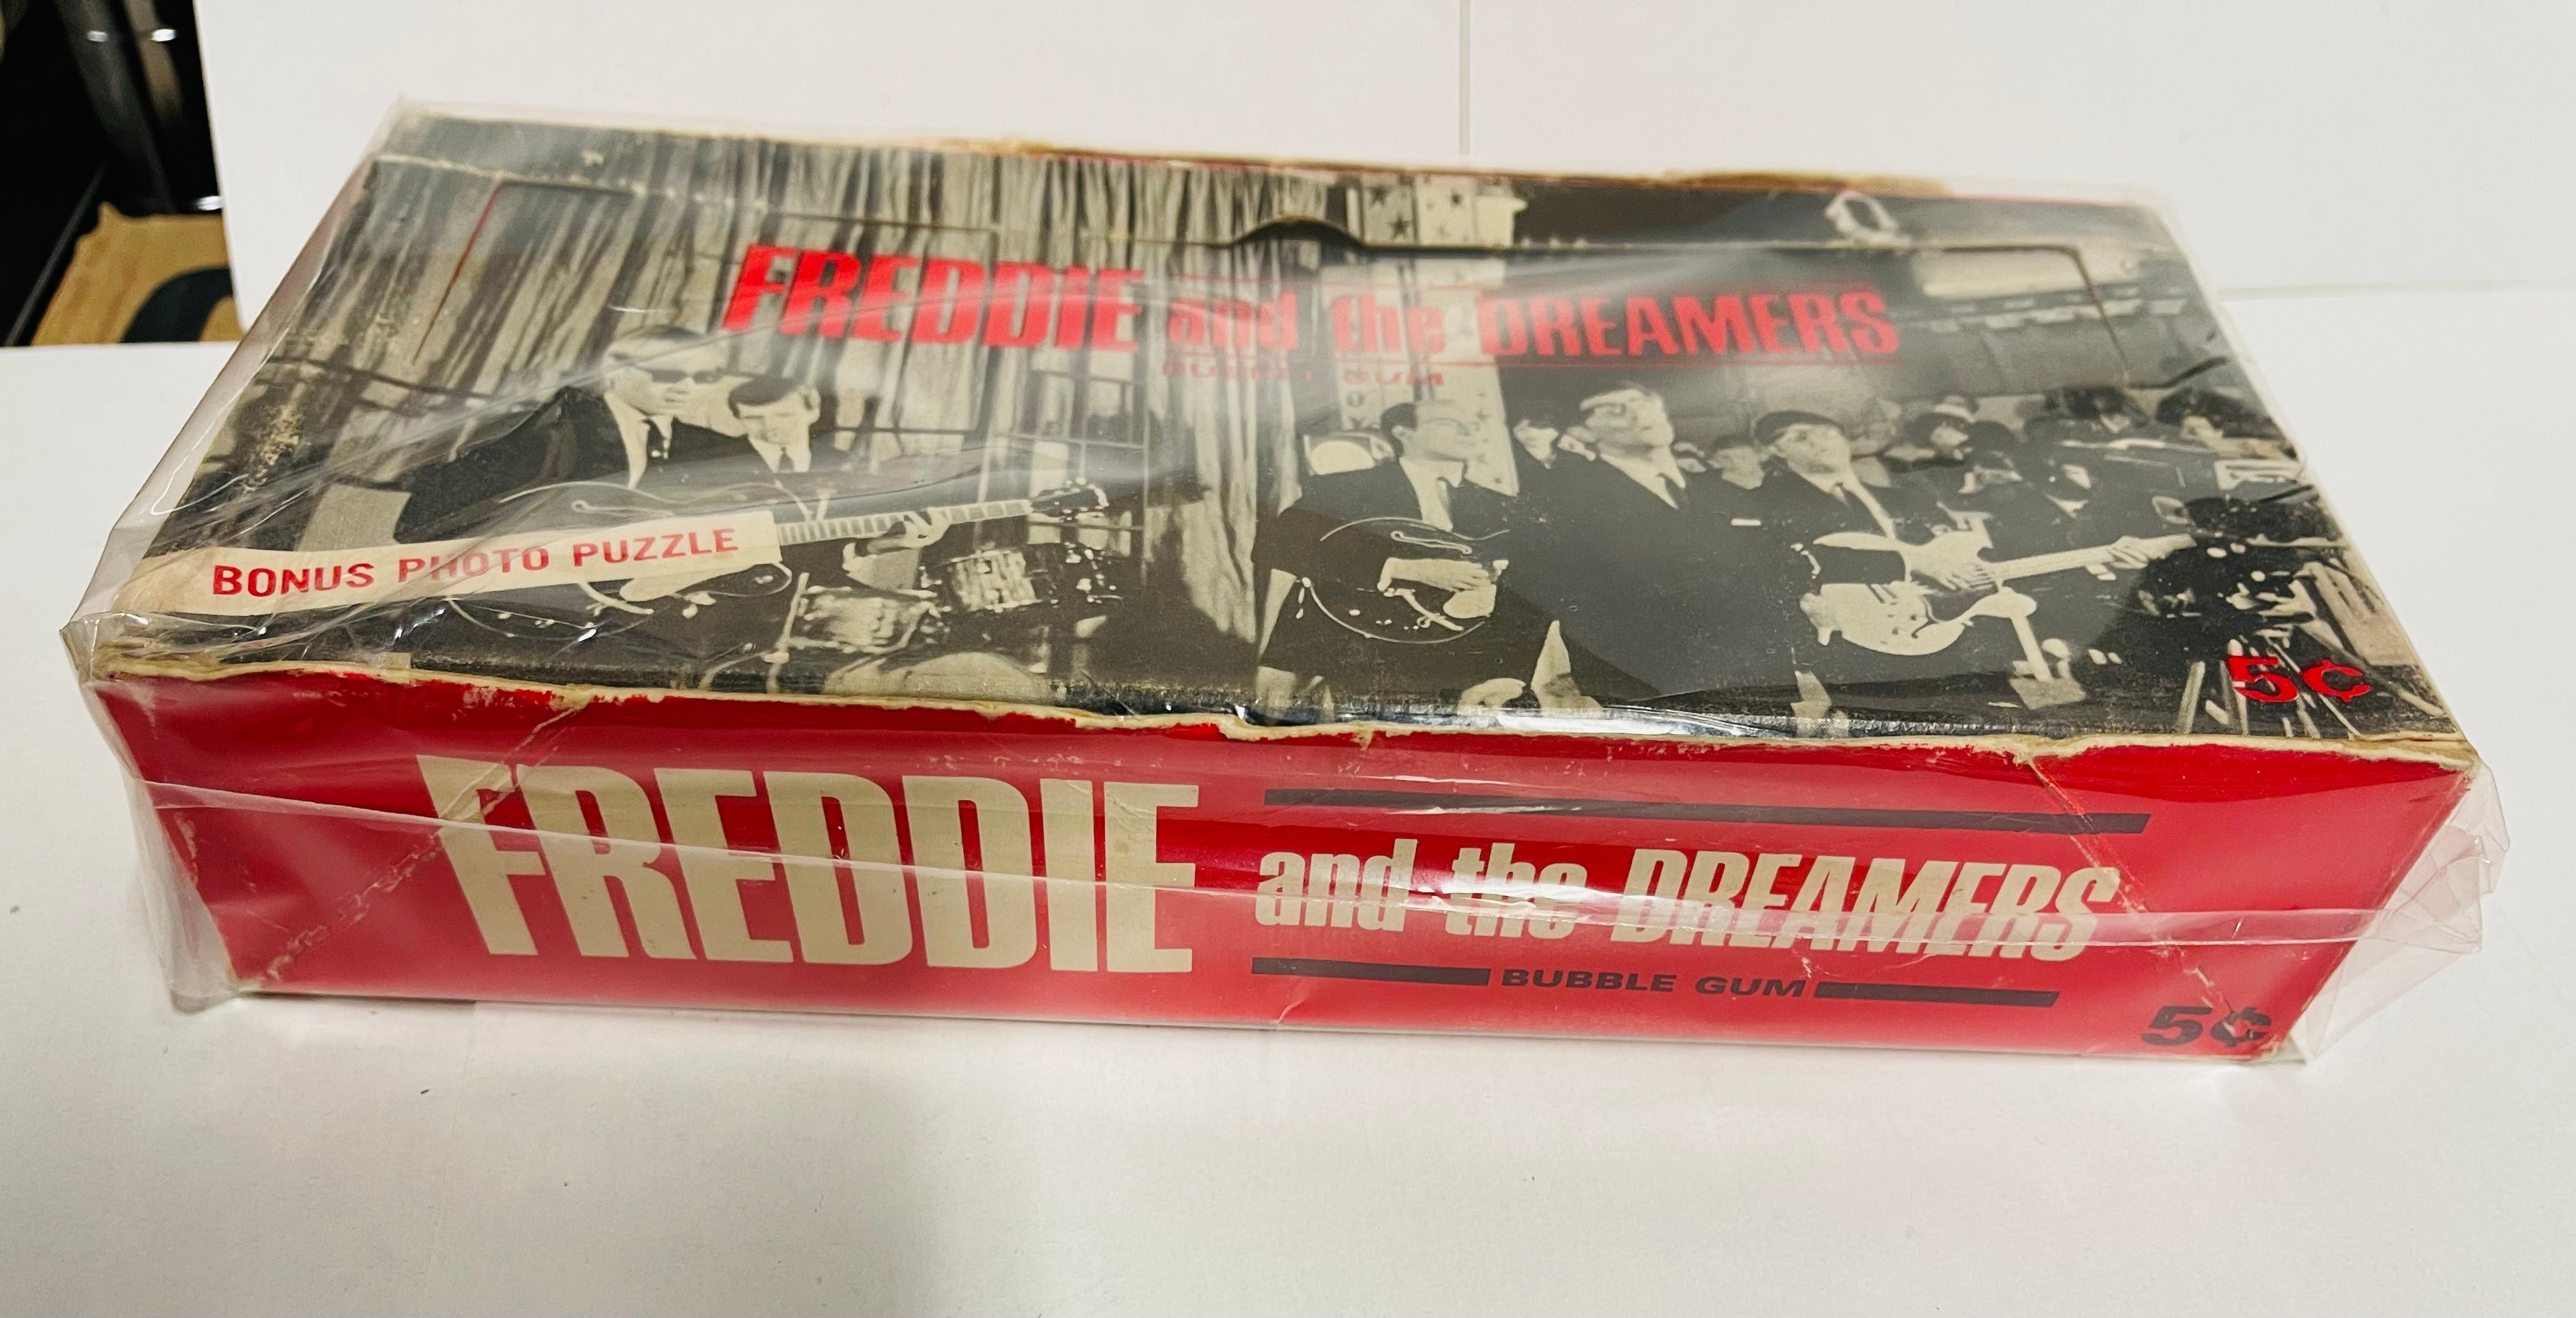 Freddie and the Dreamers rare empty display box 1965